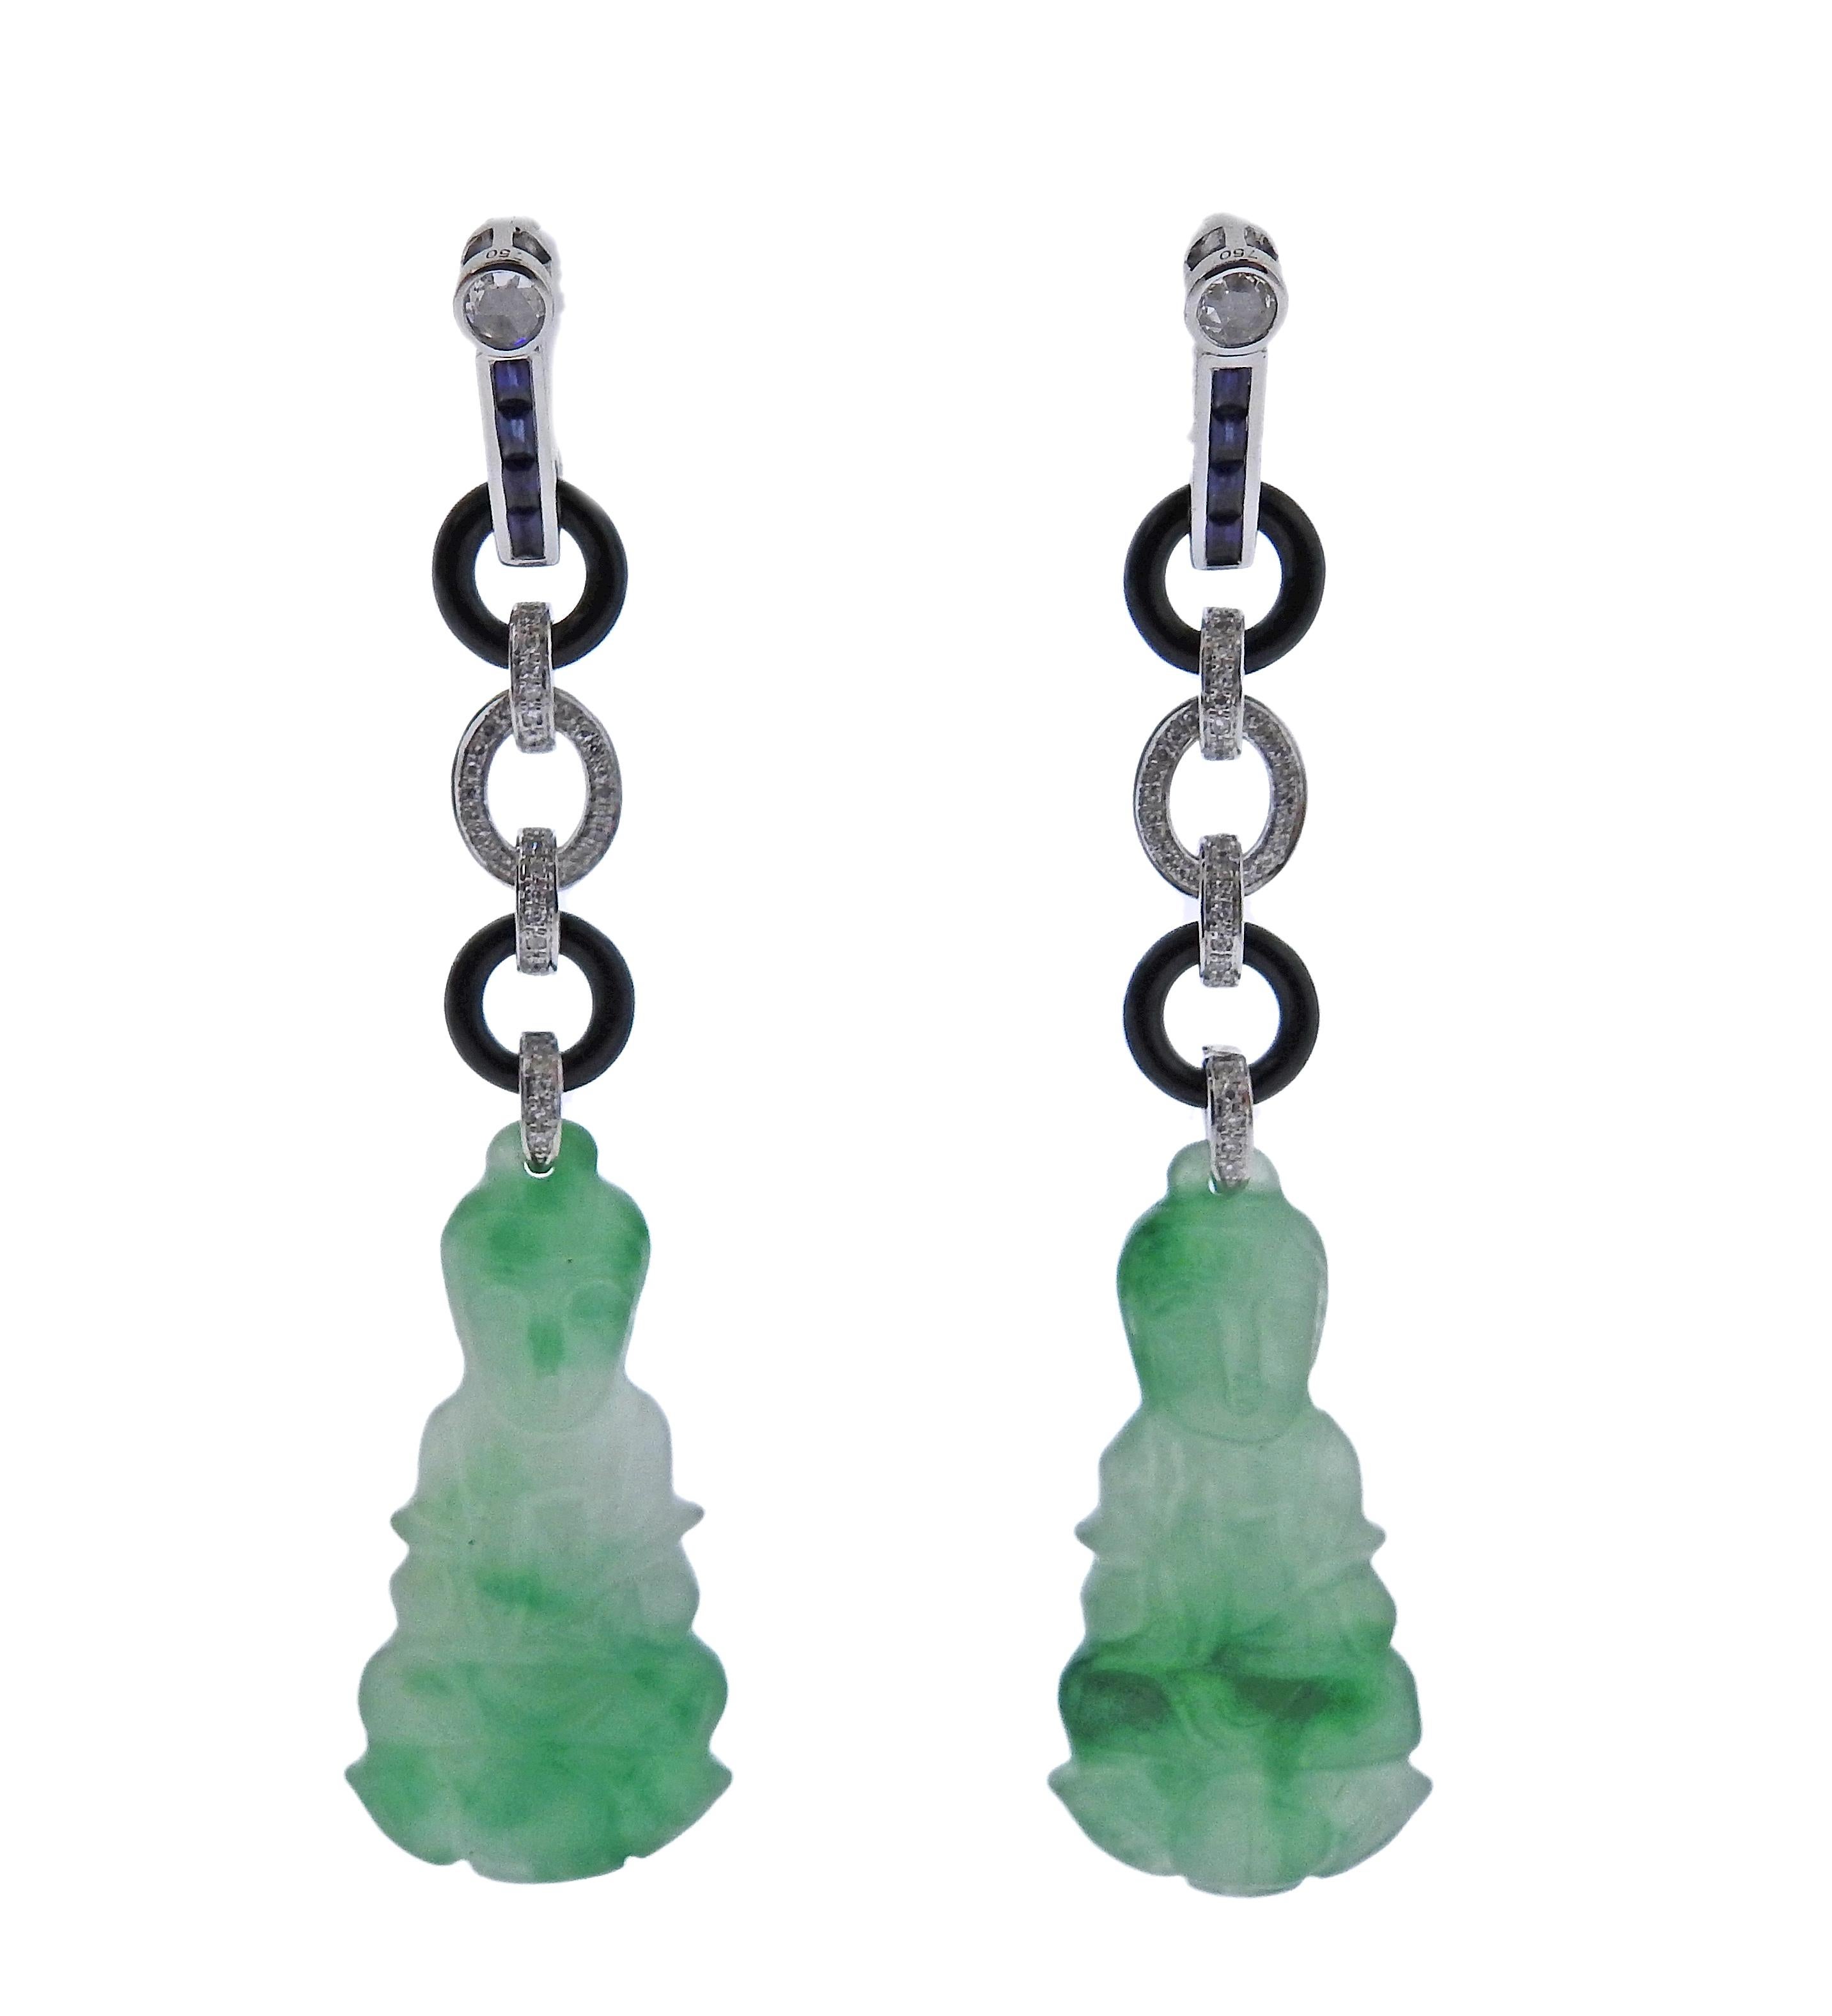 Pair of 18k gold long drop earrings, with 31.63ctw in carved jadeite jade, sapphire, onyx and 0.28ctw in diamonds. Earrings are 65mm long. Marked 750. Weight - 12.8 grams.